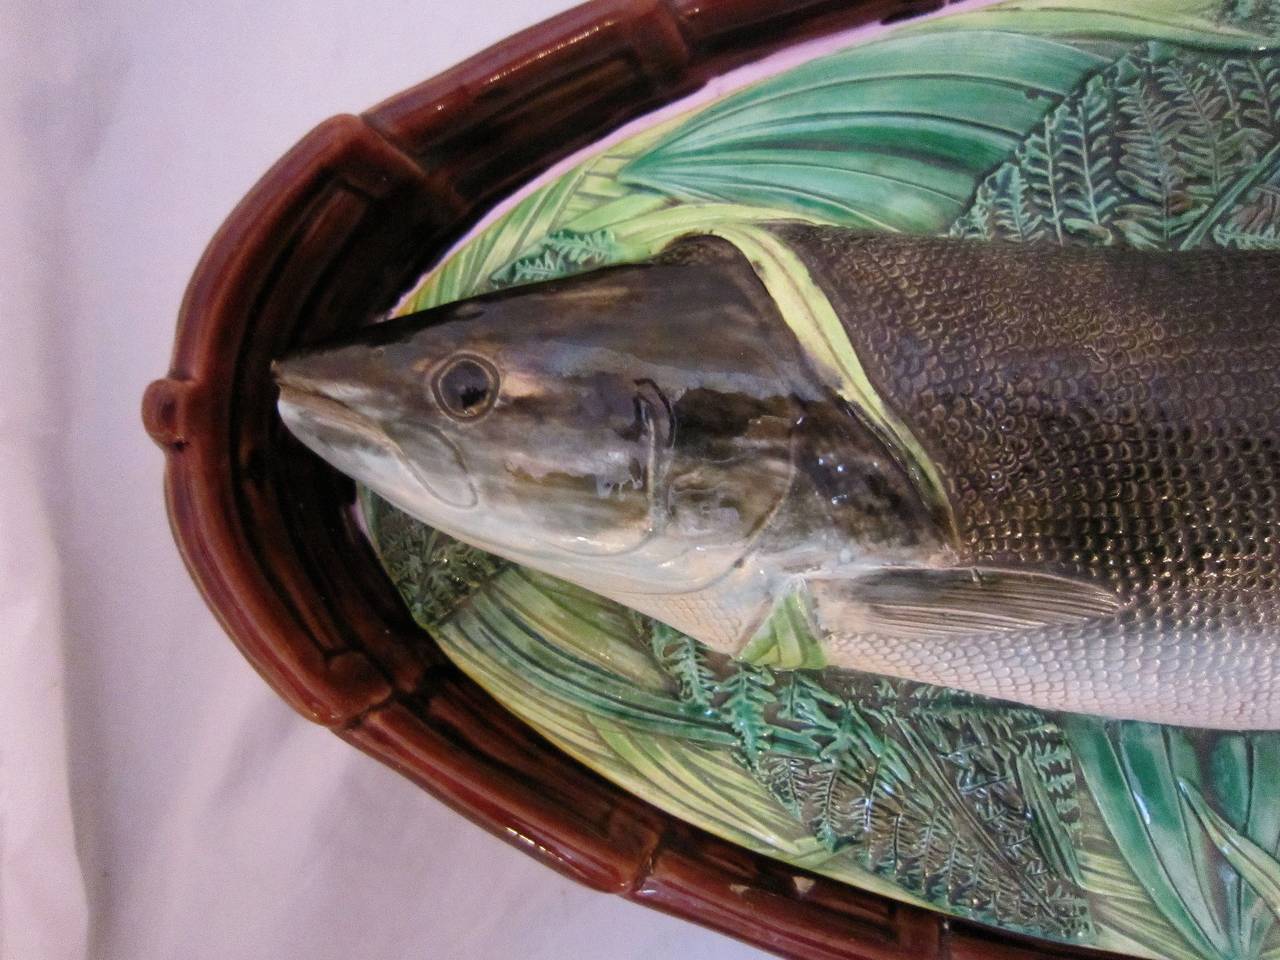 A fine Majolica fish server or salmon tureen by the celebrated English pottery firm, George Jones. The oval-shaped tureen featuring a relief on the lid of a salmon laying on a bed of ferns on the lid. The lid opening to a fitted, removable pierced